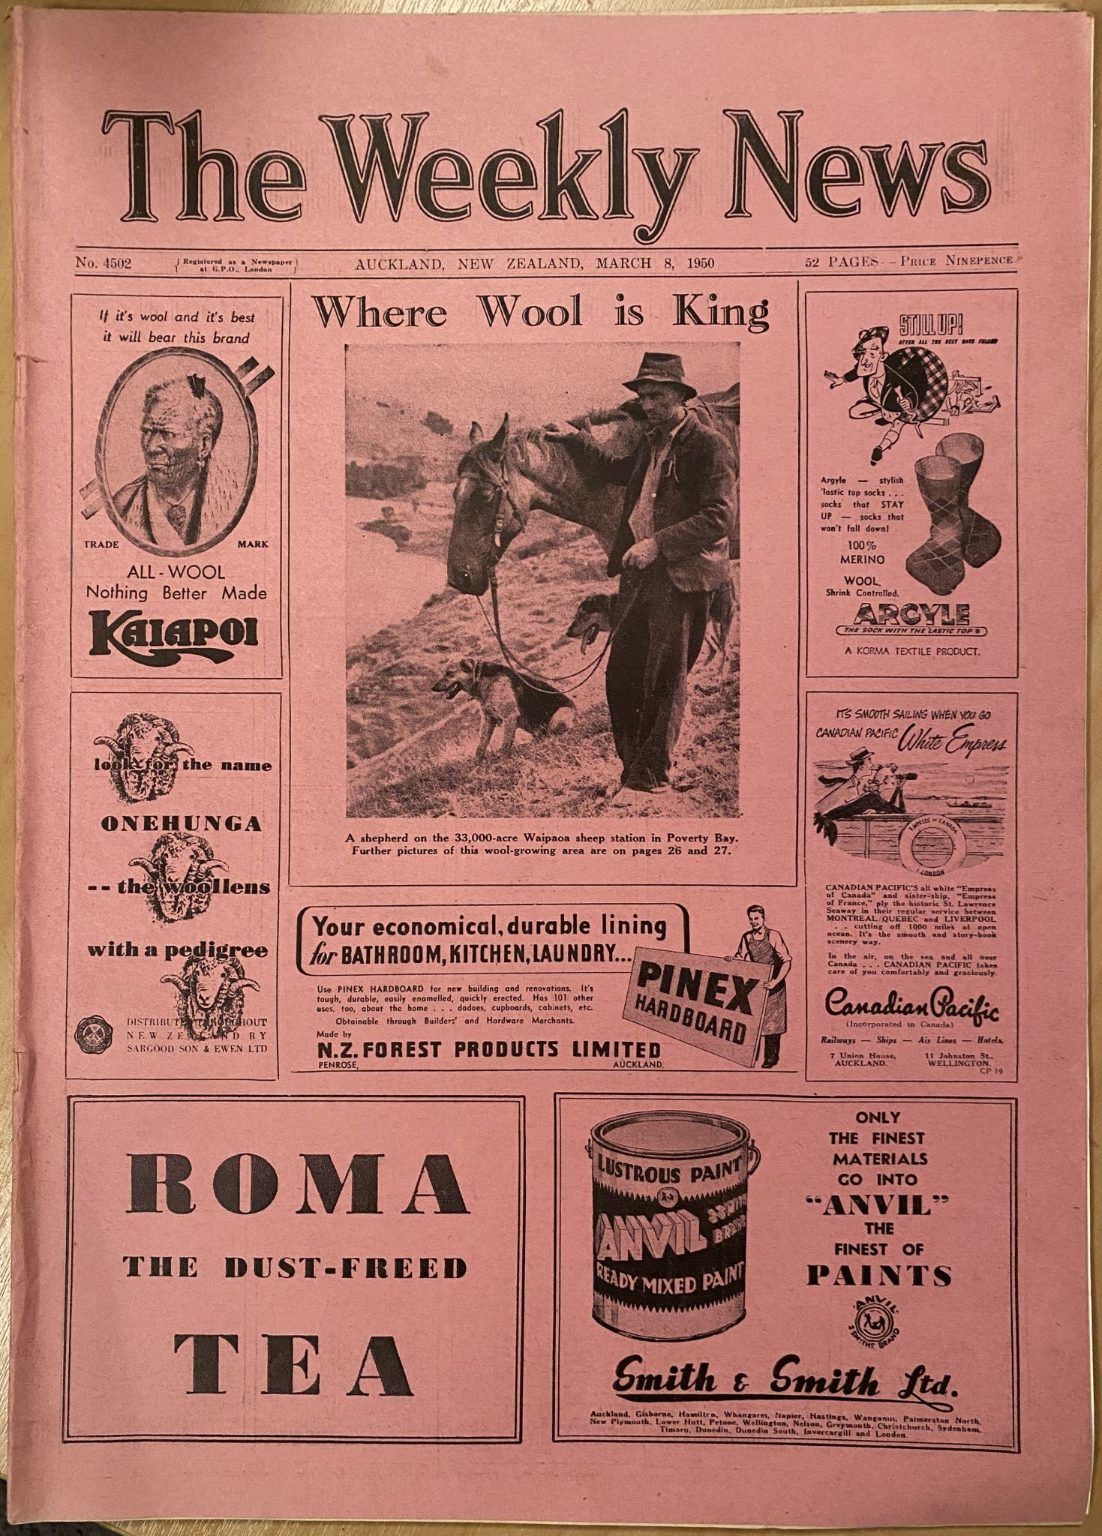 OLD NEWSPAPER: The Weekly News, No. 4502, 8 March 1950